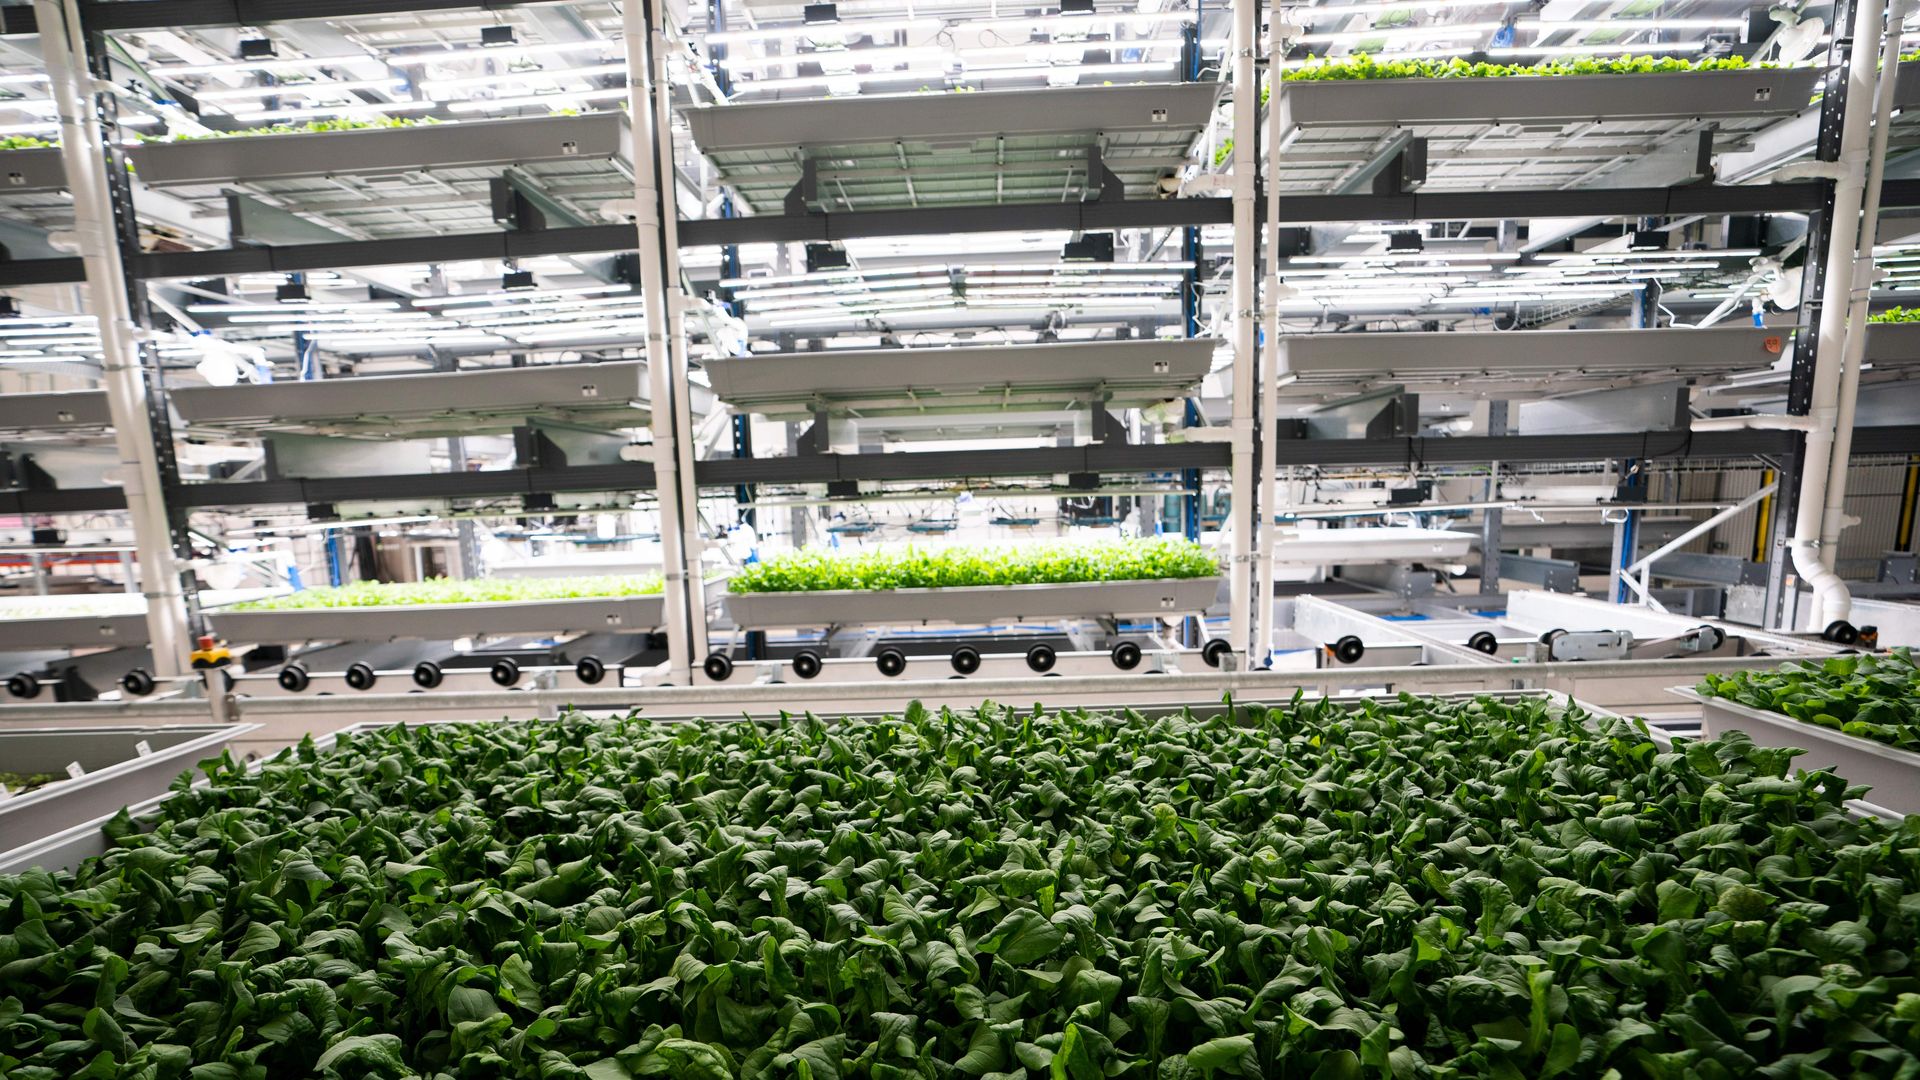 Greens are grown at Bowery Farming in Kearny, New Jersey. 